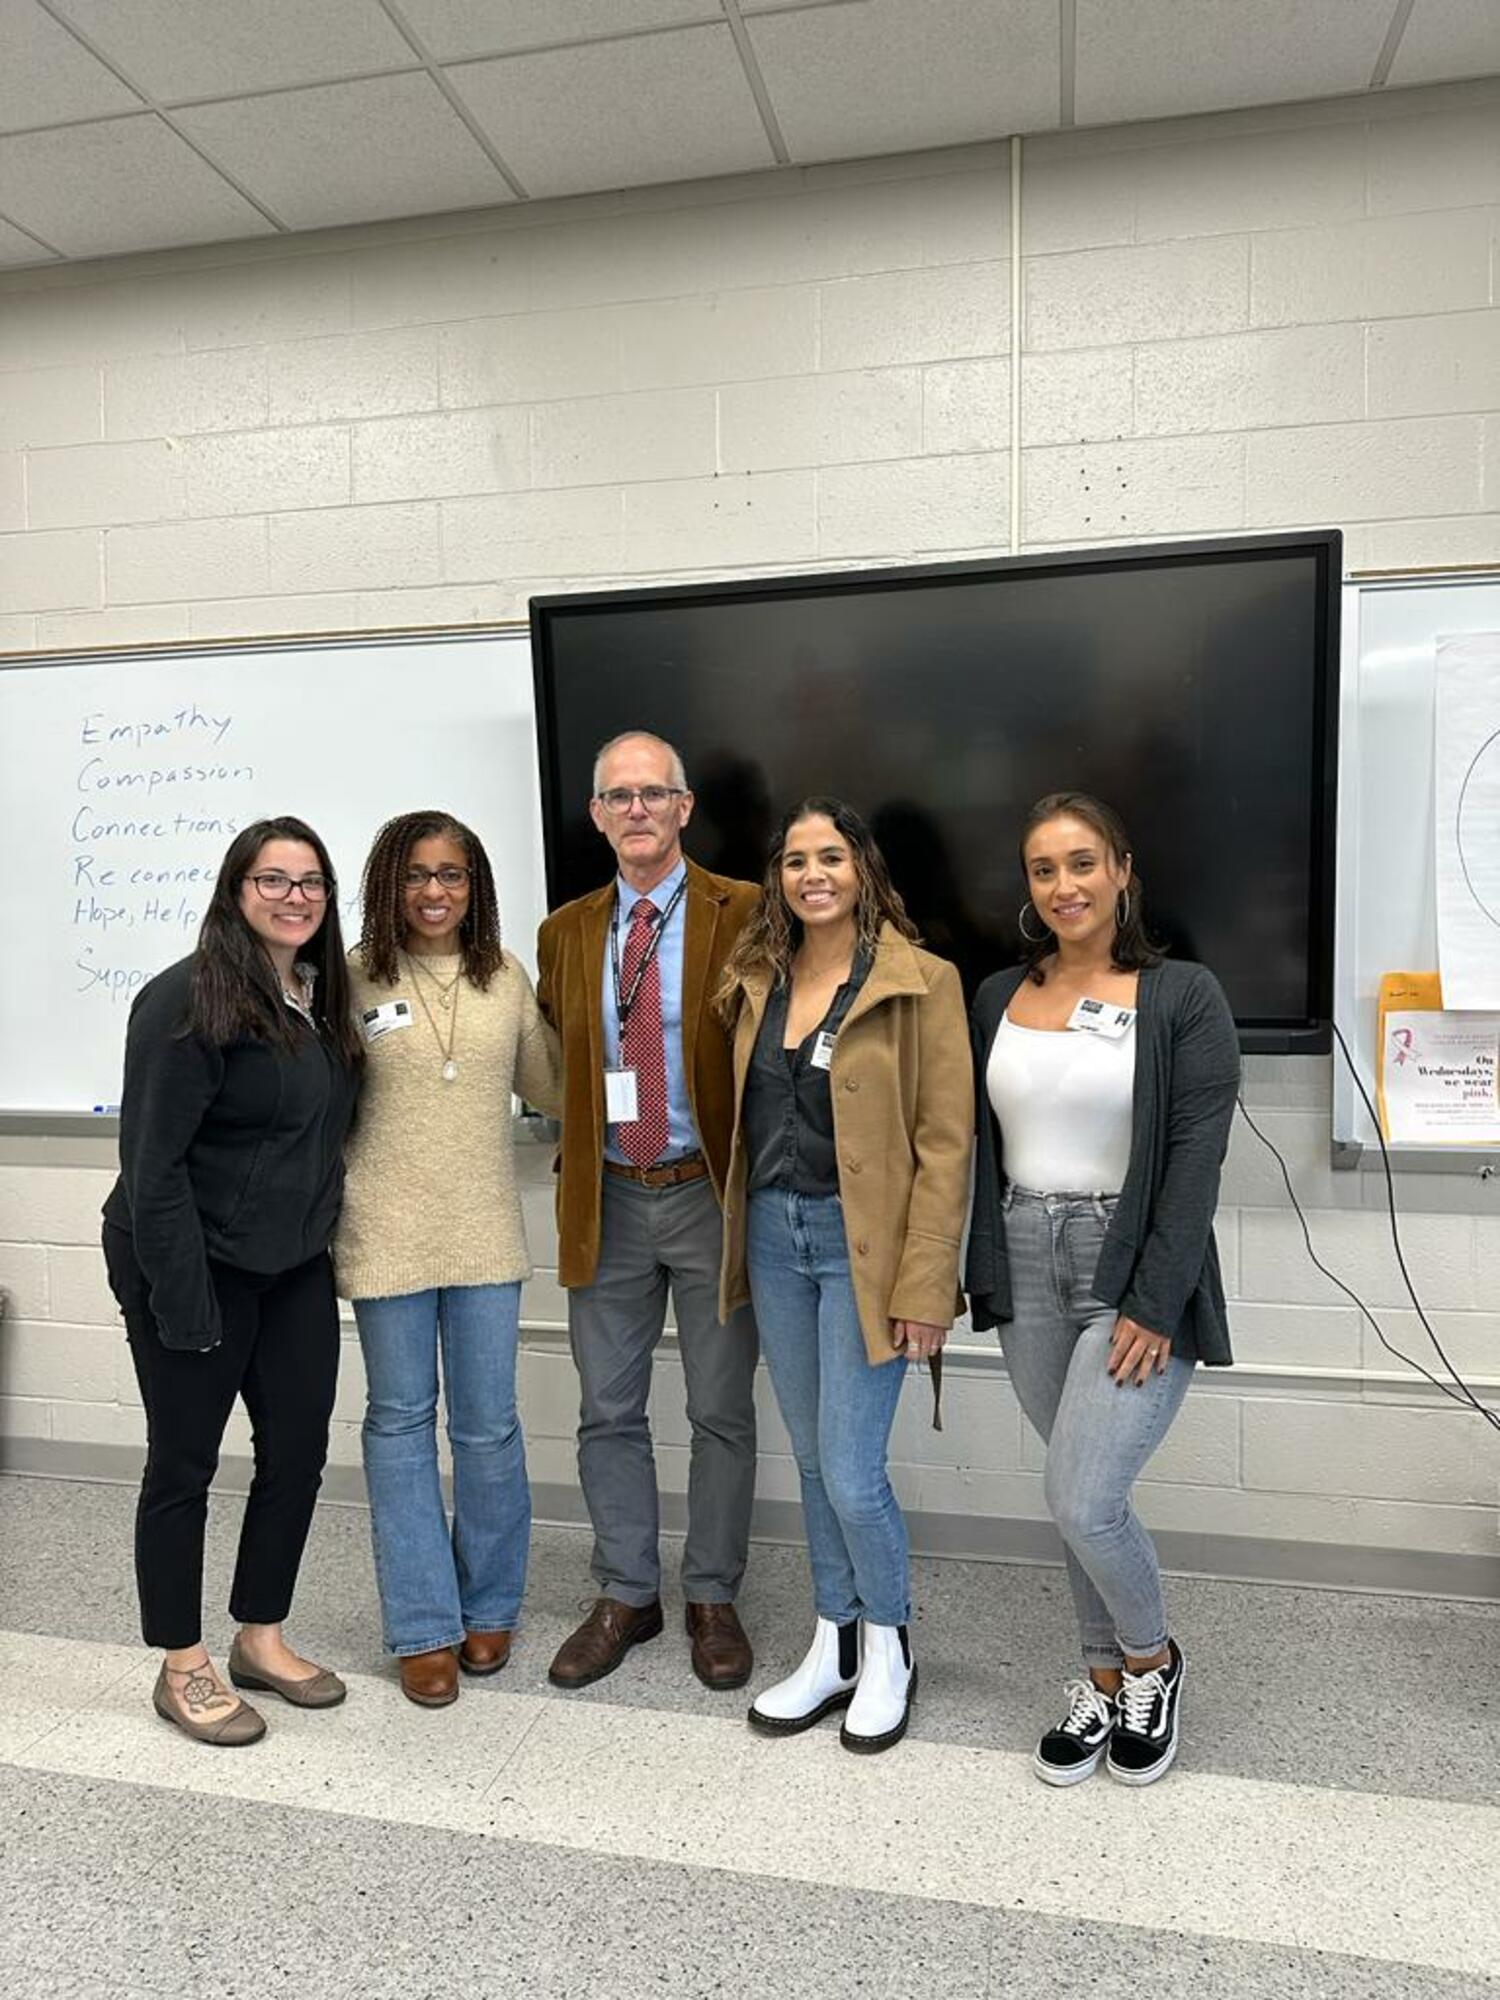 Members of the Youth Connect team visit Jim Stewart's class at East Hampton High School. From left, Melissa Vogt, Faith Evans, Adriana Cardona and Jessica Tovar. COURTESY OLA OF EASTERN LONG ISLAND